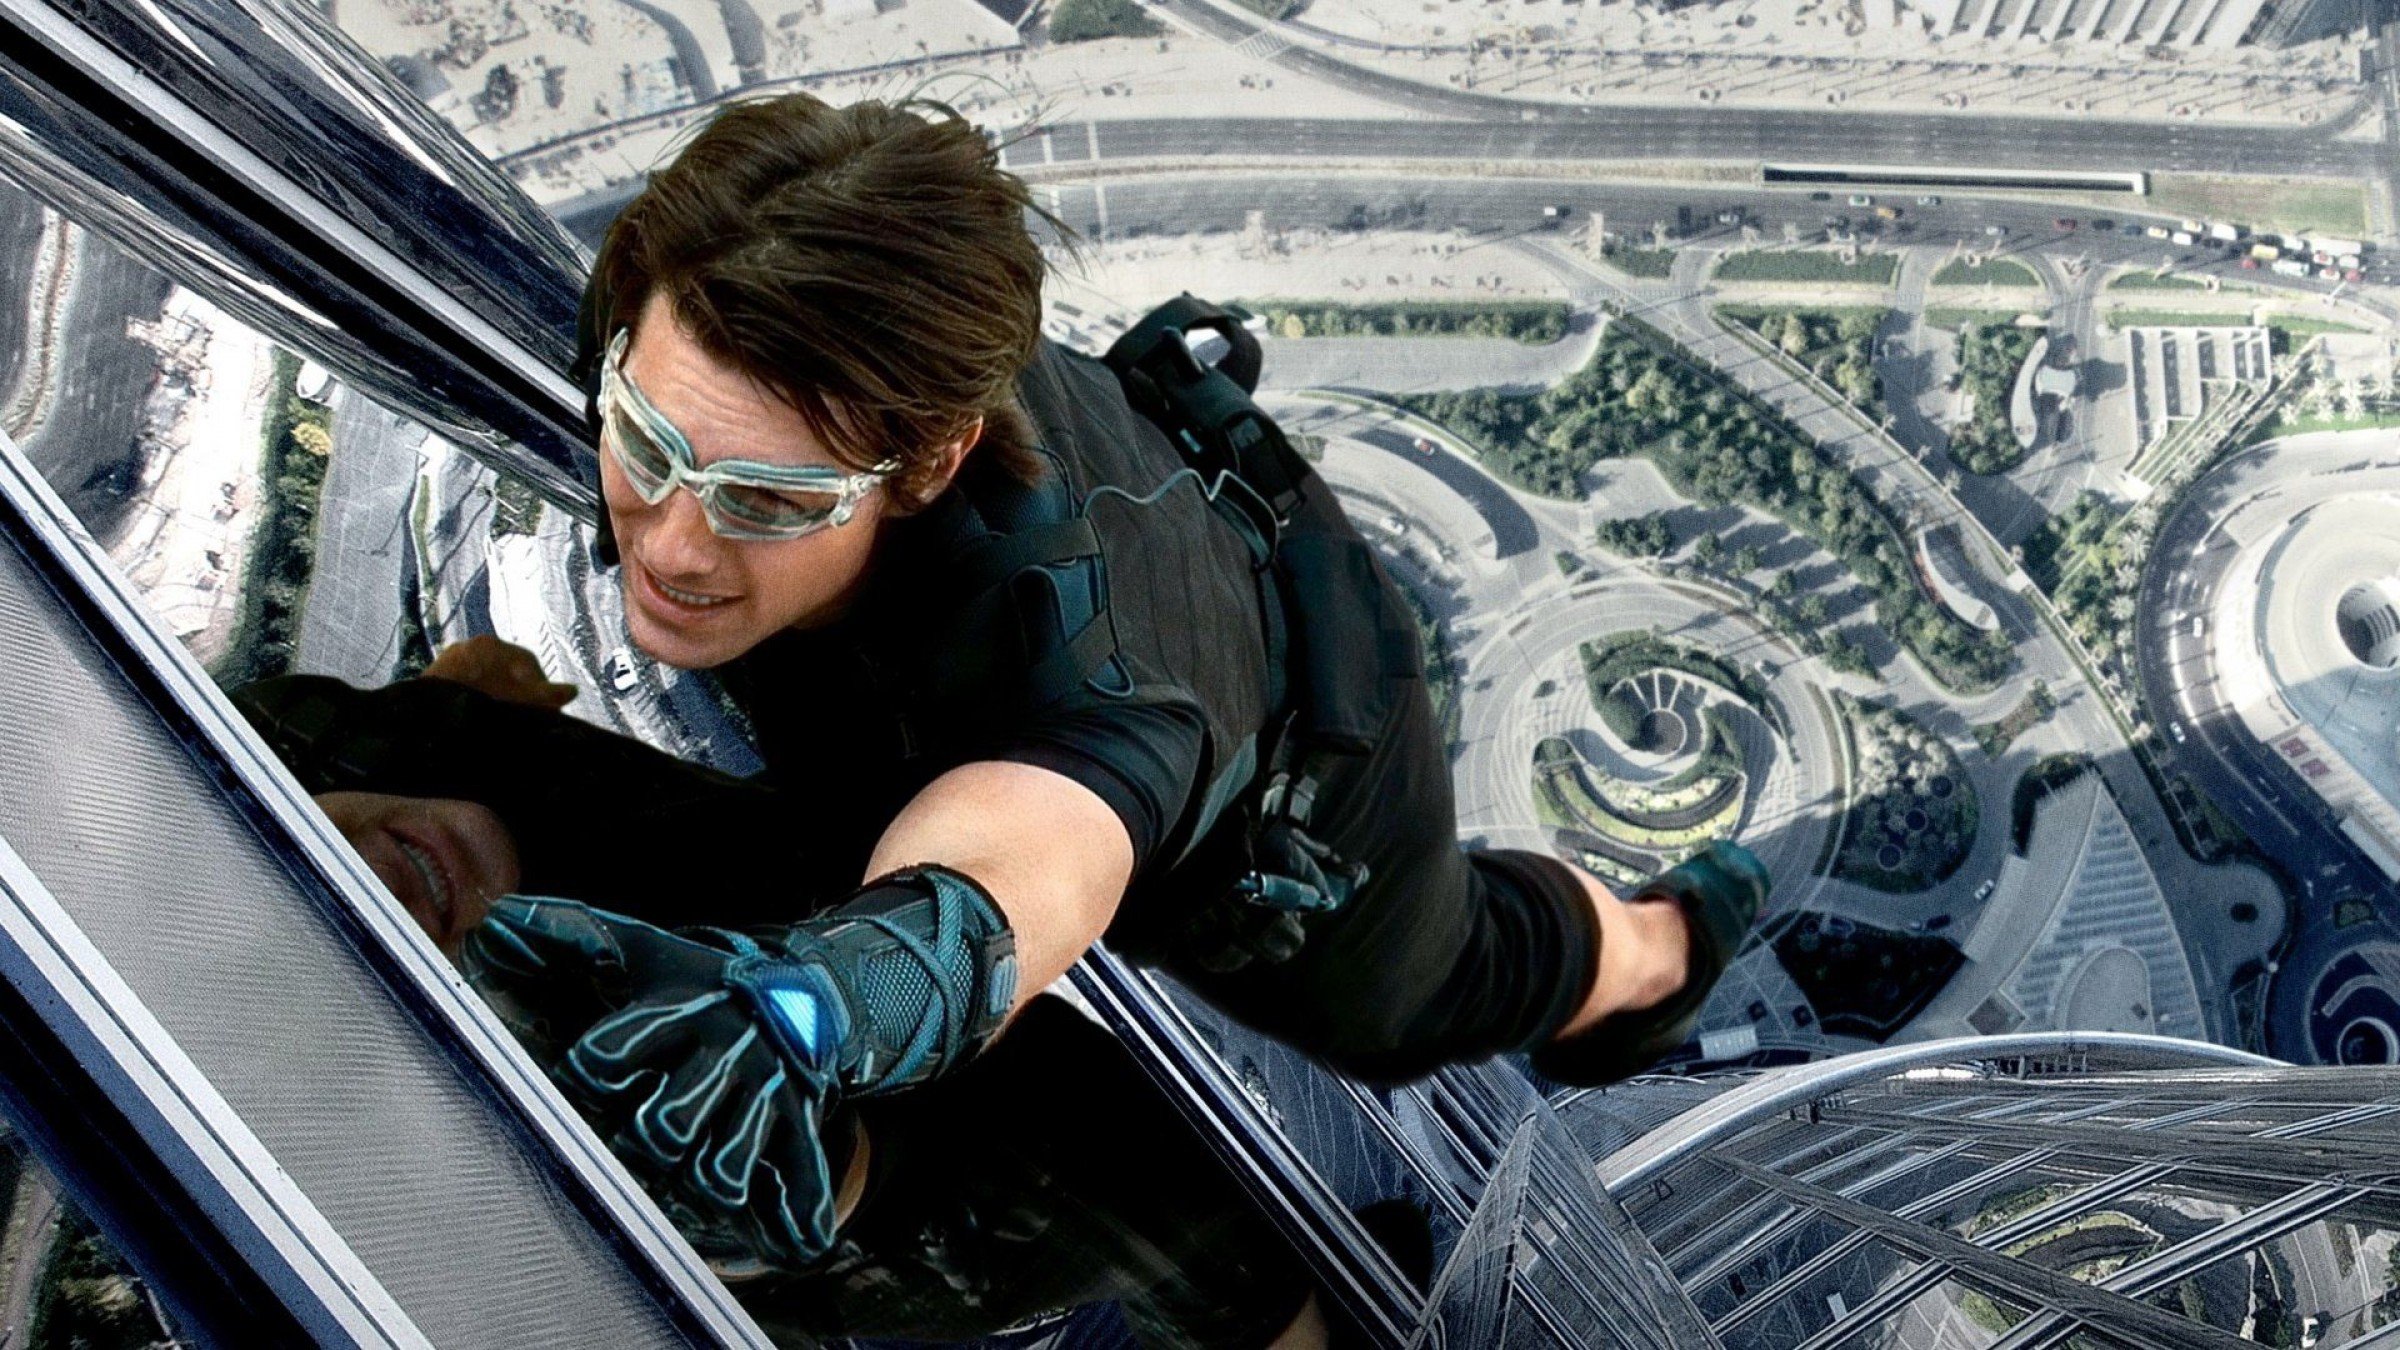 Picture of Tom Cruise in the mission impossible 